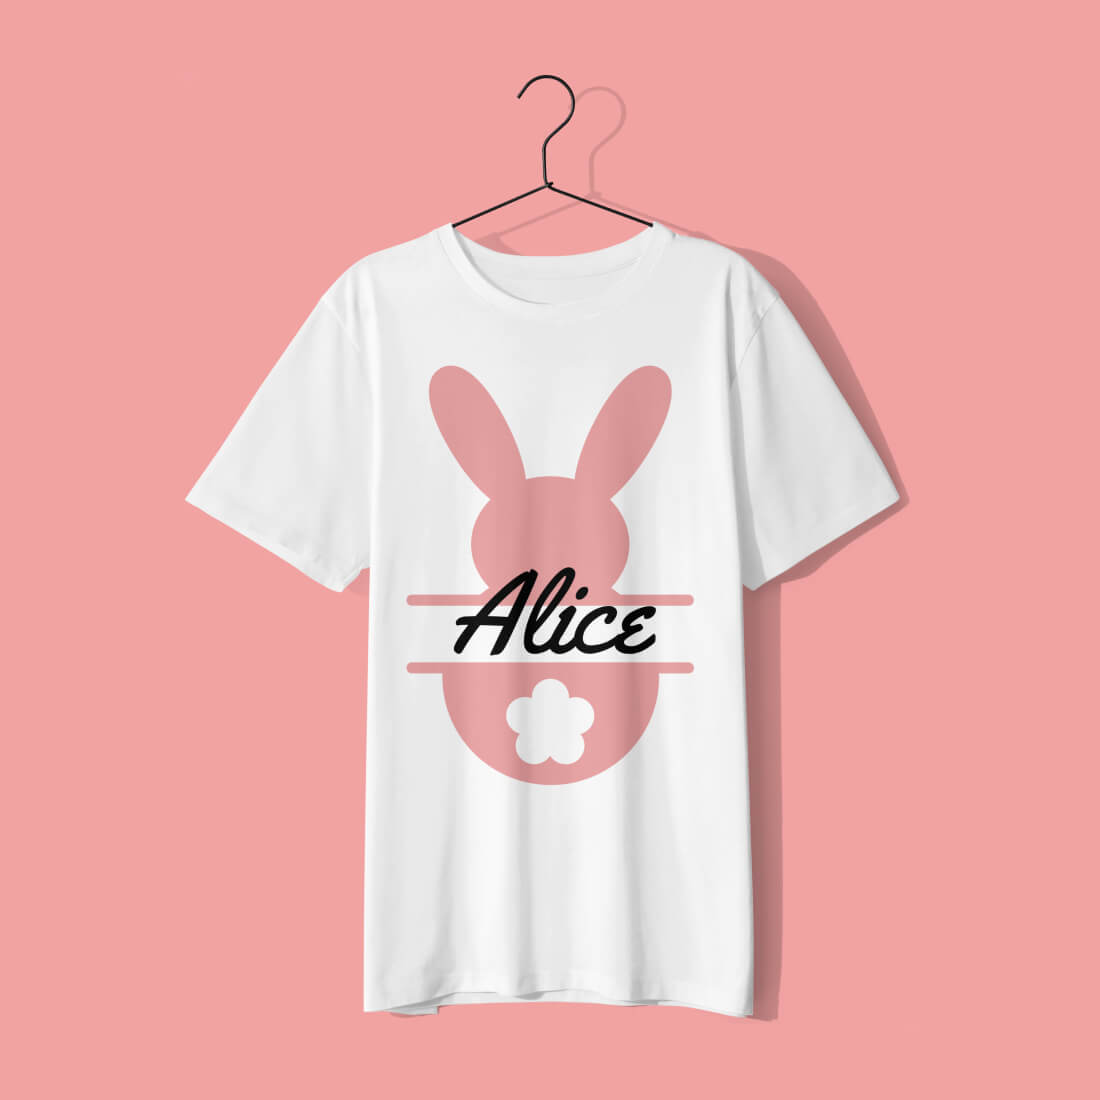 A pink rabbit with the name Alice is drawn on a white T-shirt.